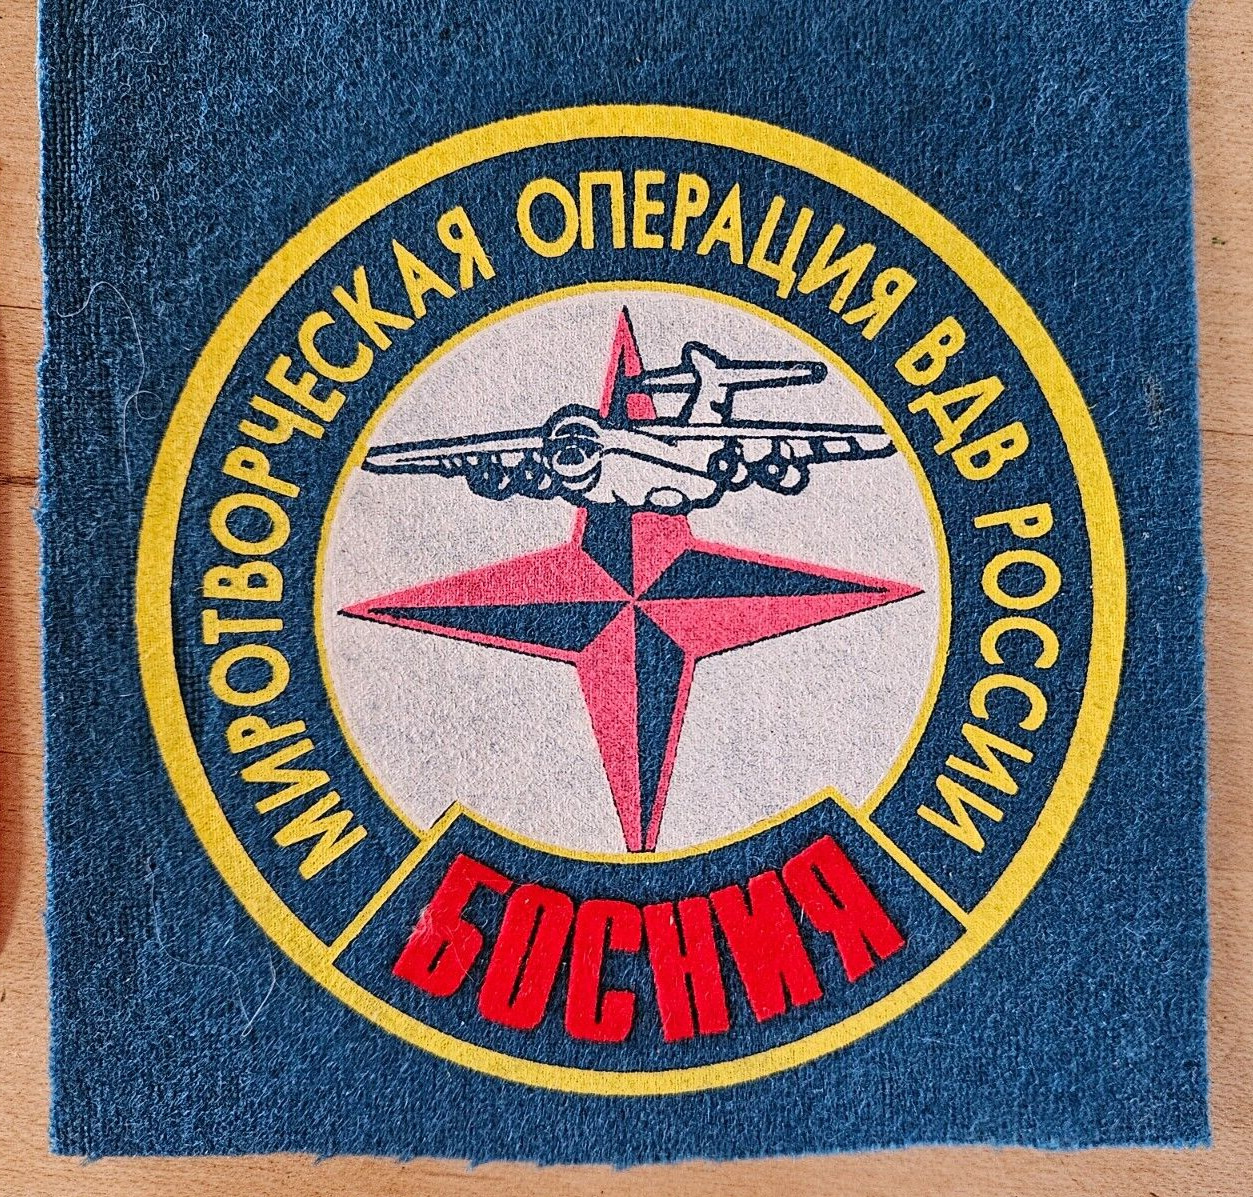 Russian sleeve patch for the Airborne Brigade of Russia in Bosnia